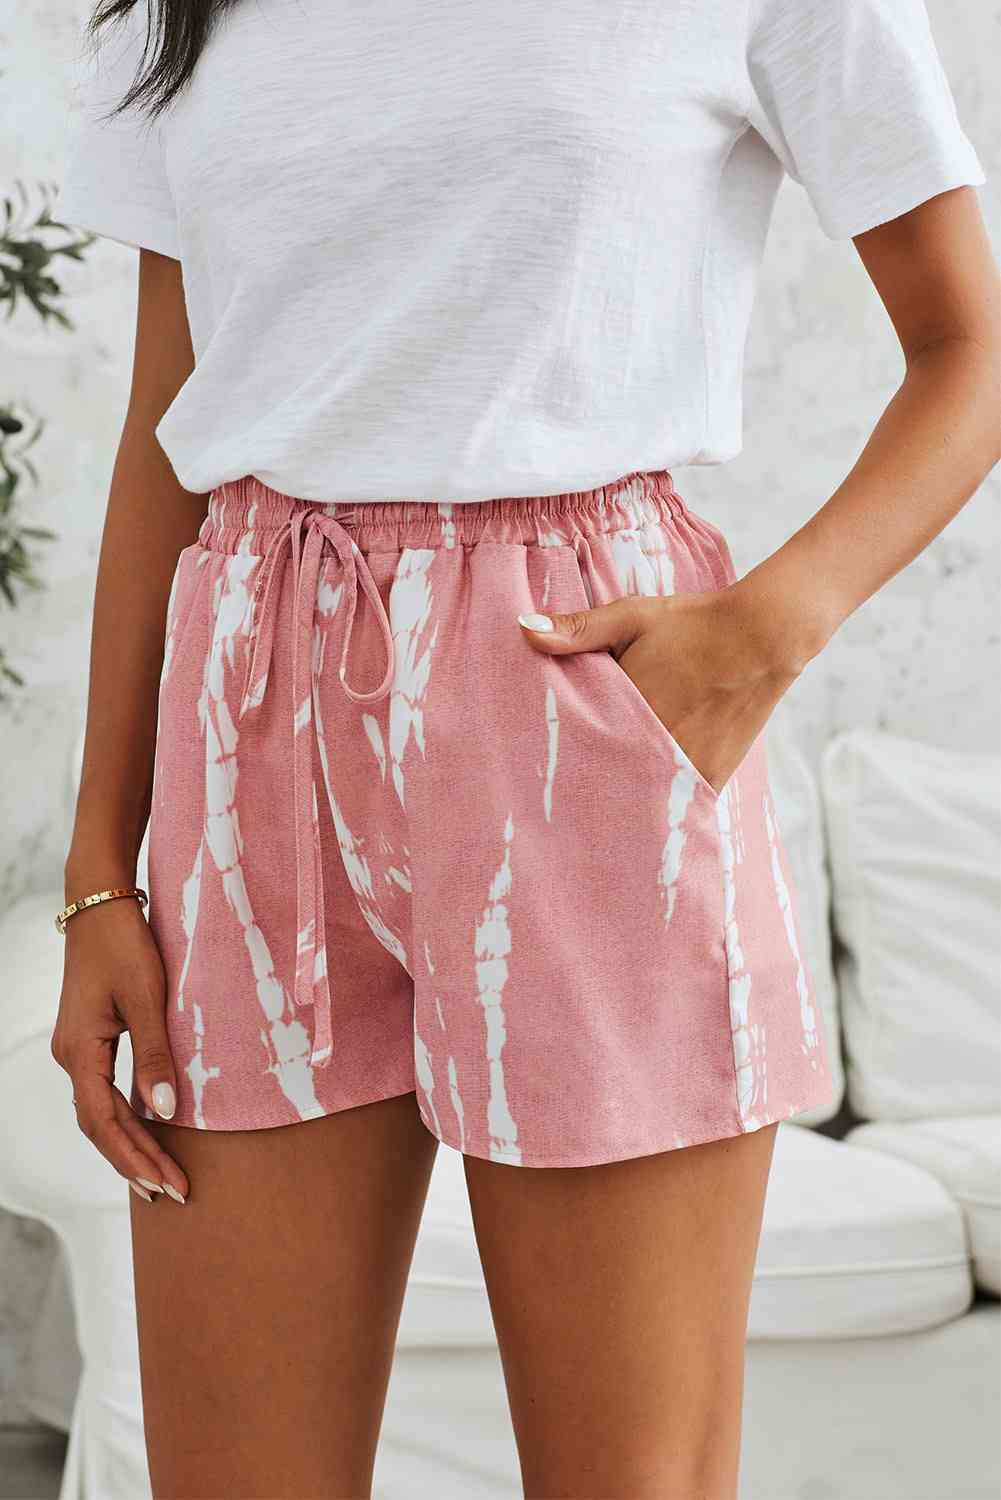 Candy Painted Tie Dye Shorts - Cheeky Chic Boutique